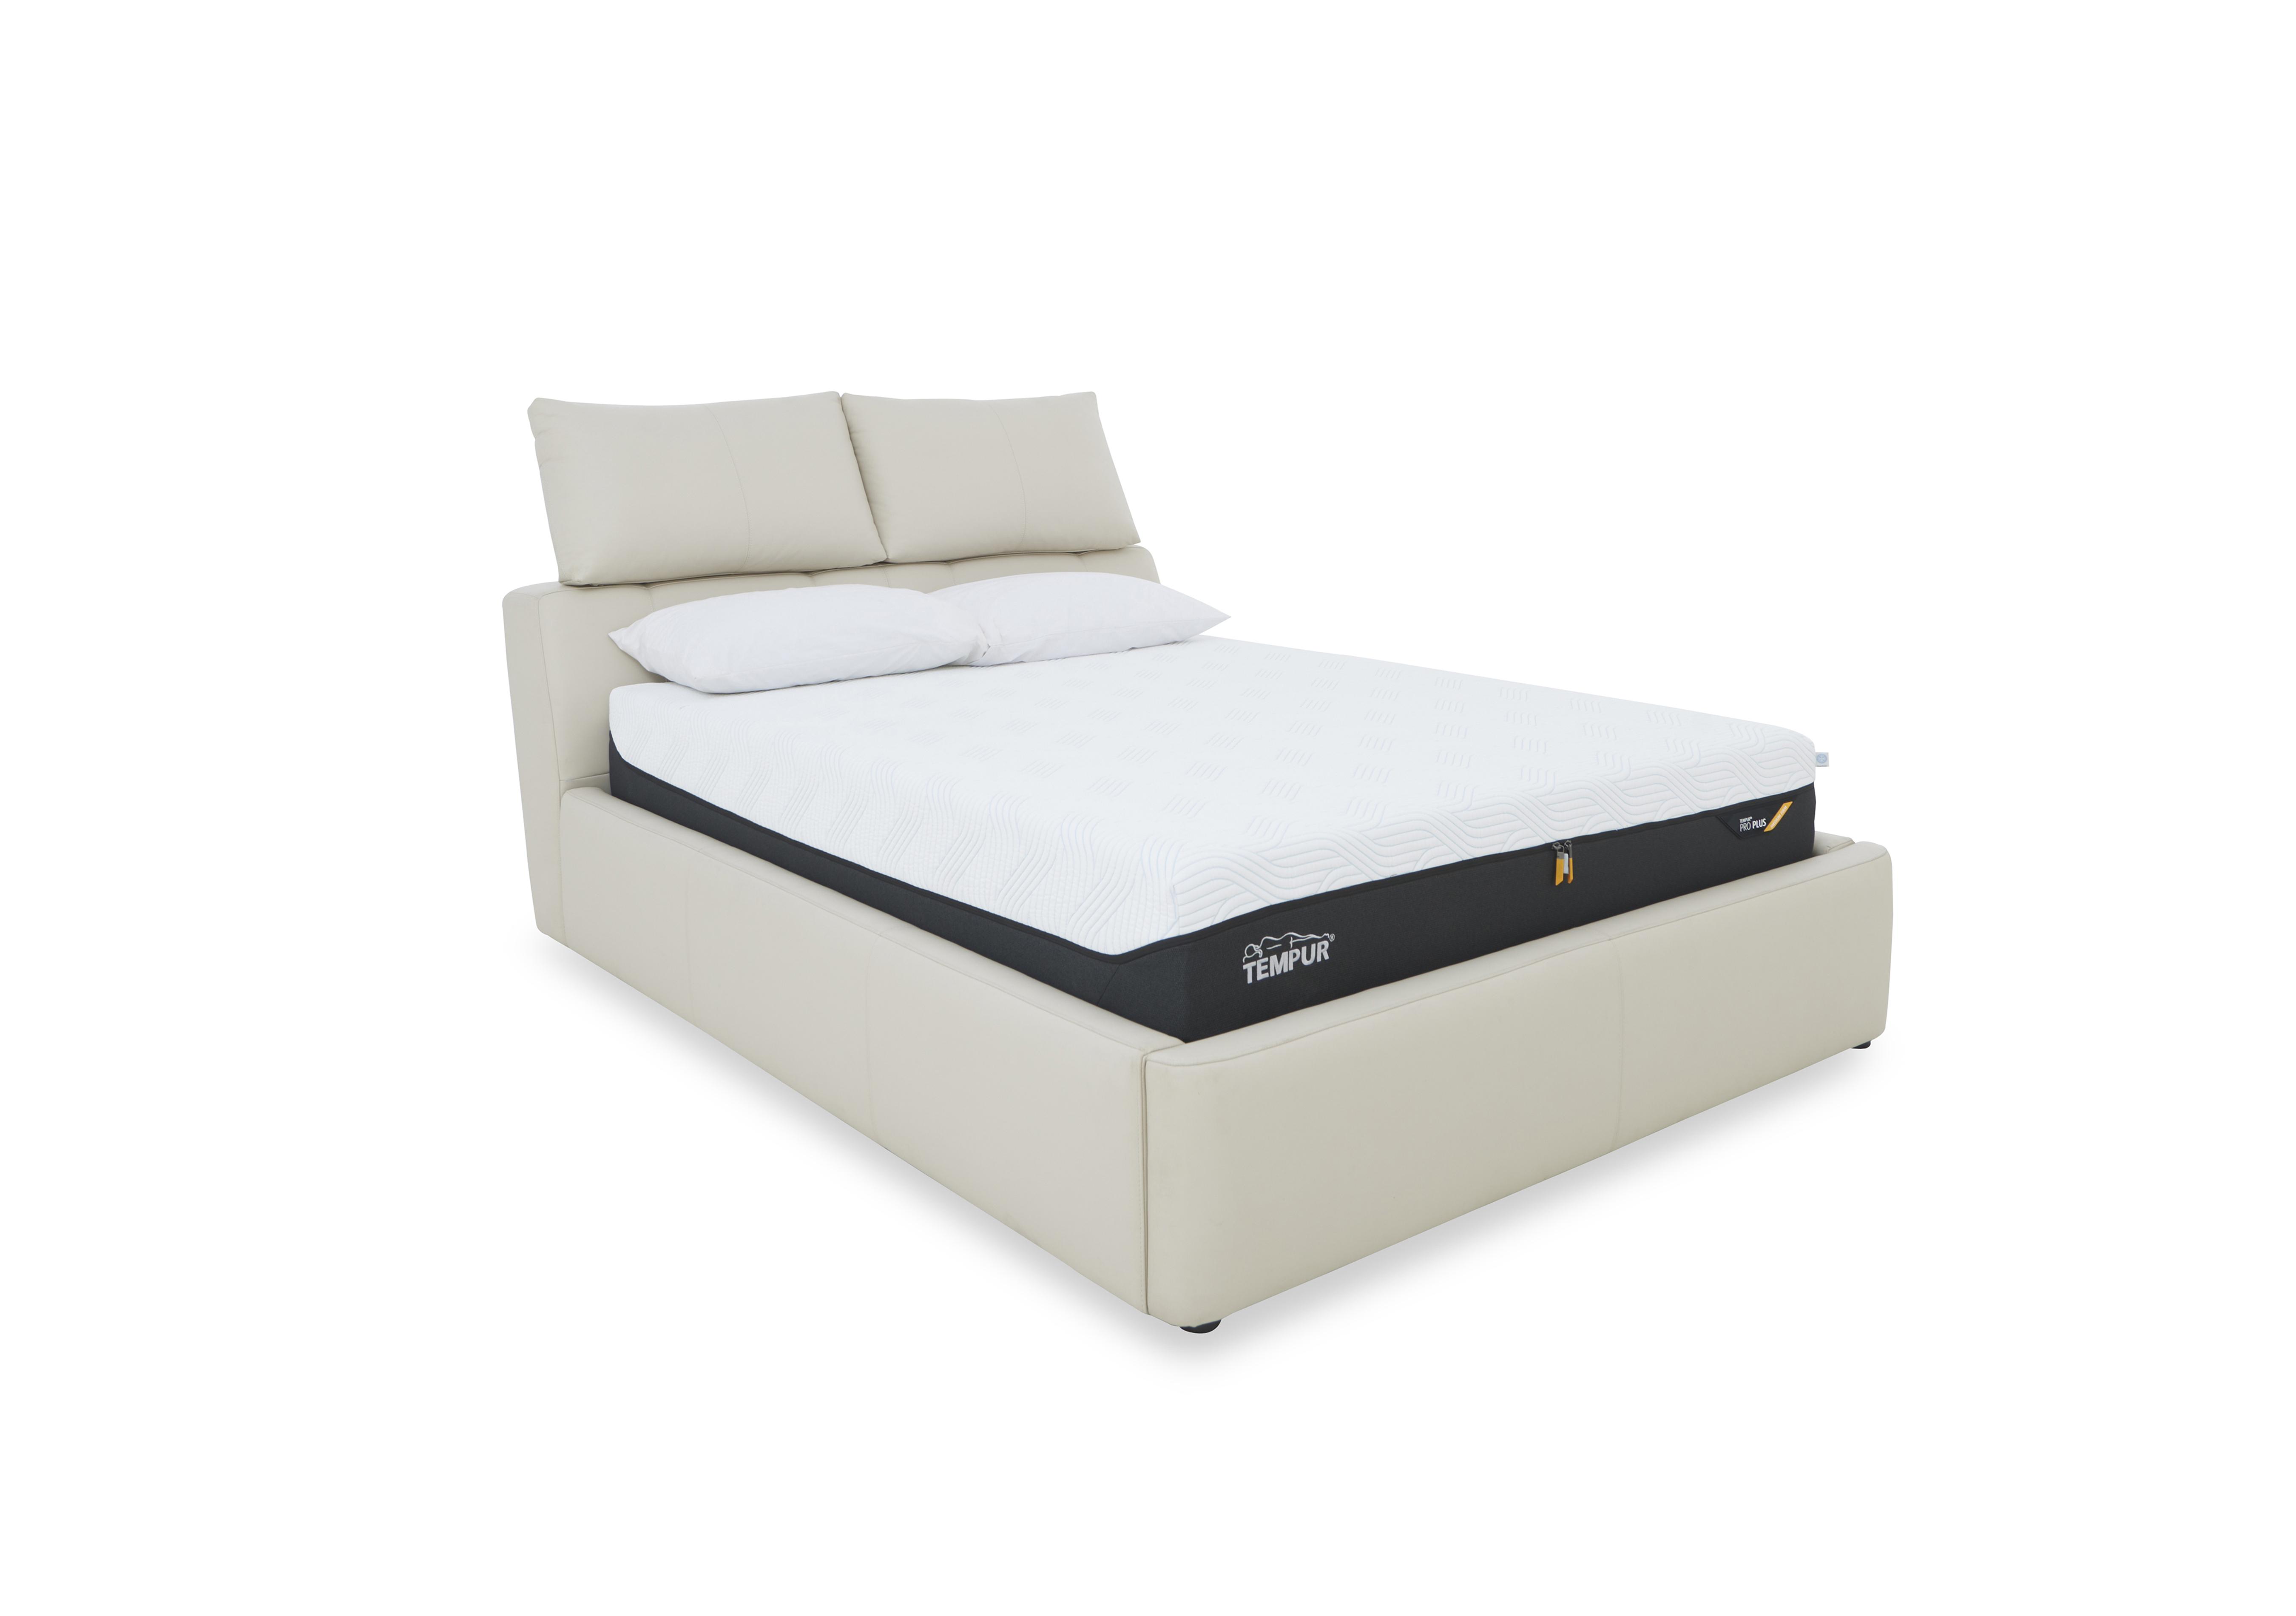 Tyrell Leather Manual Ottoman Bed Frame in Nw-521e Frost on Furniture Village